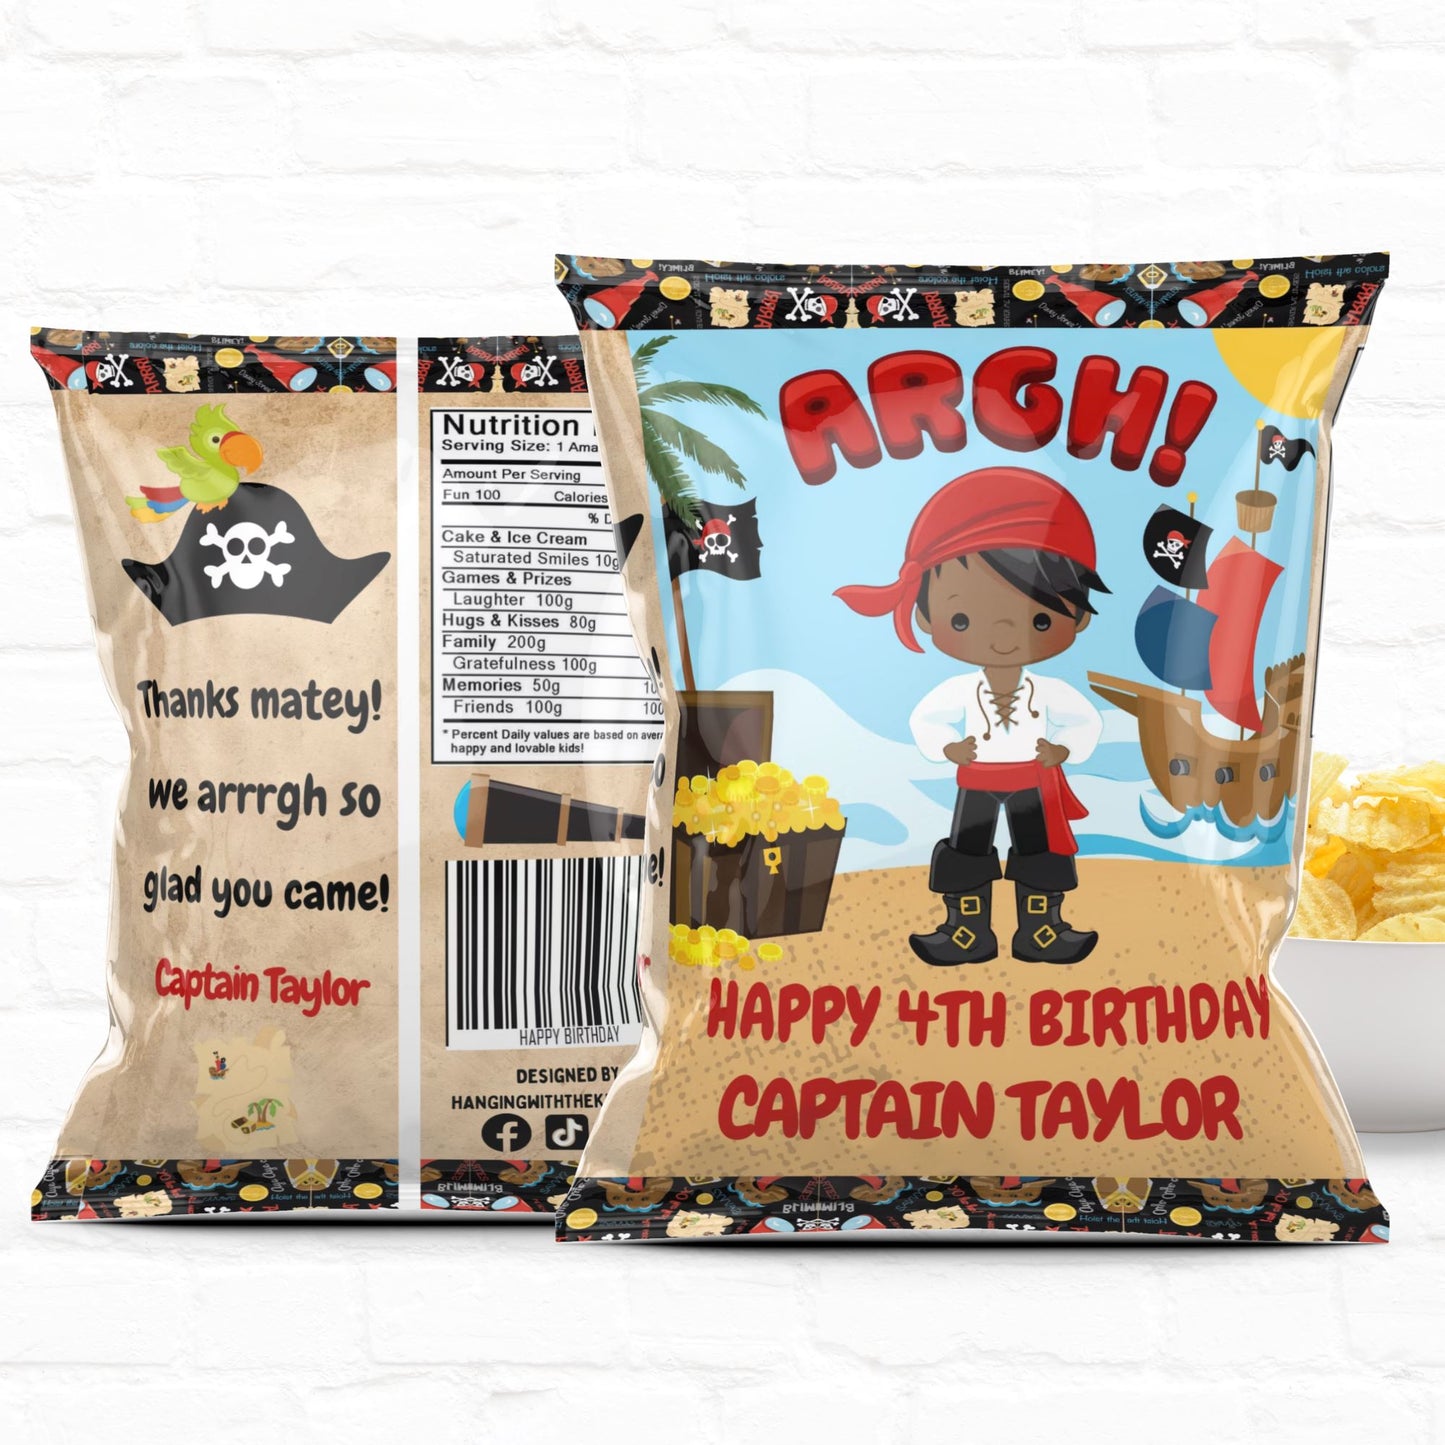 Pirate Birthday Party Favors Personalized Chip Bags Instant Download